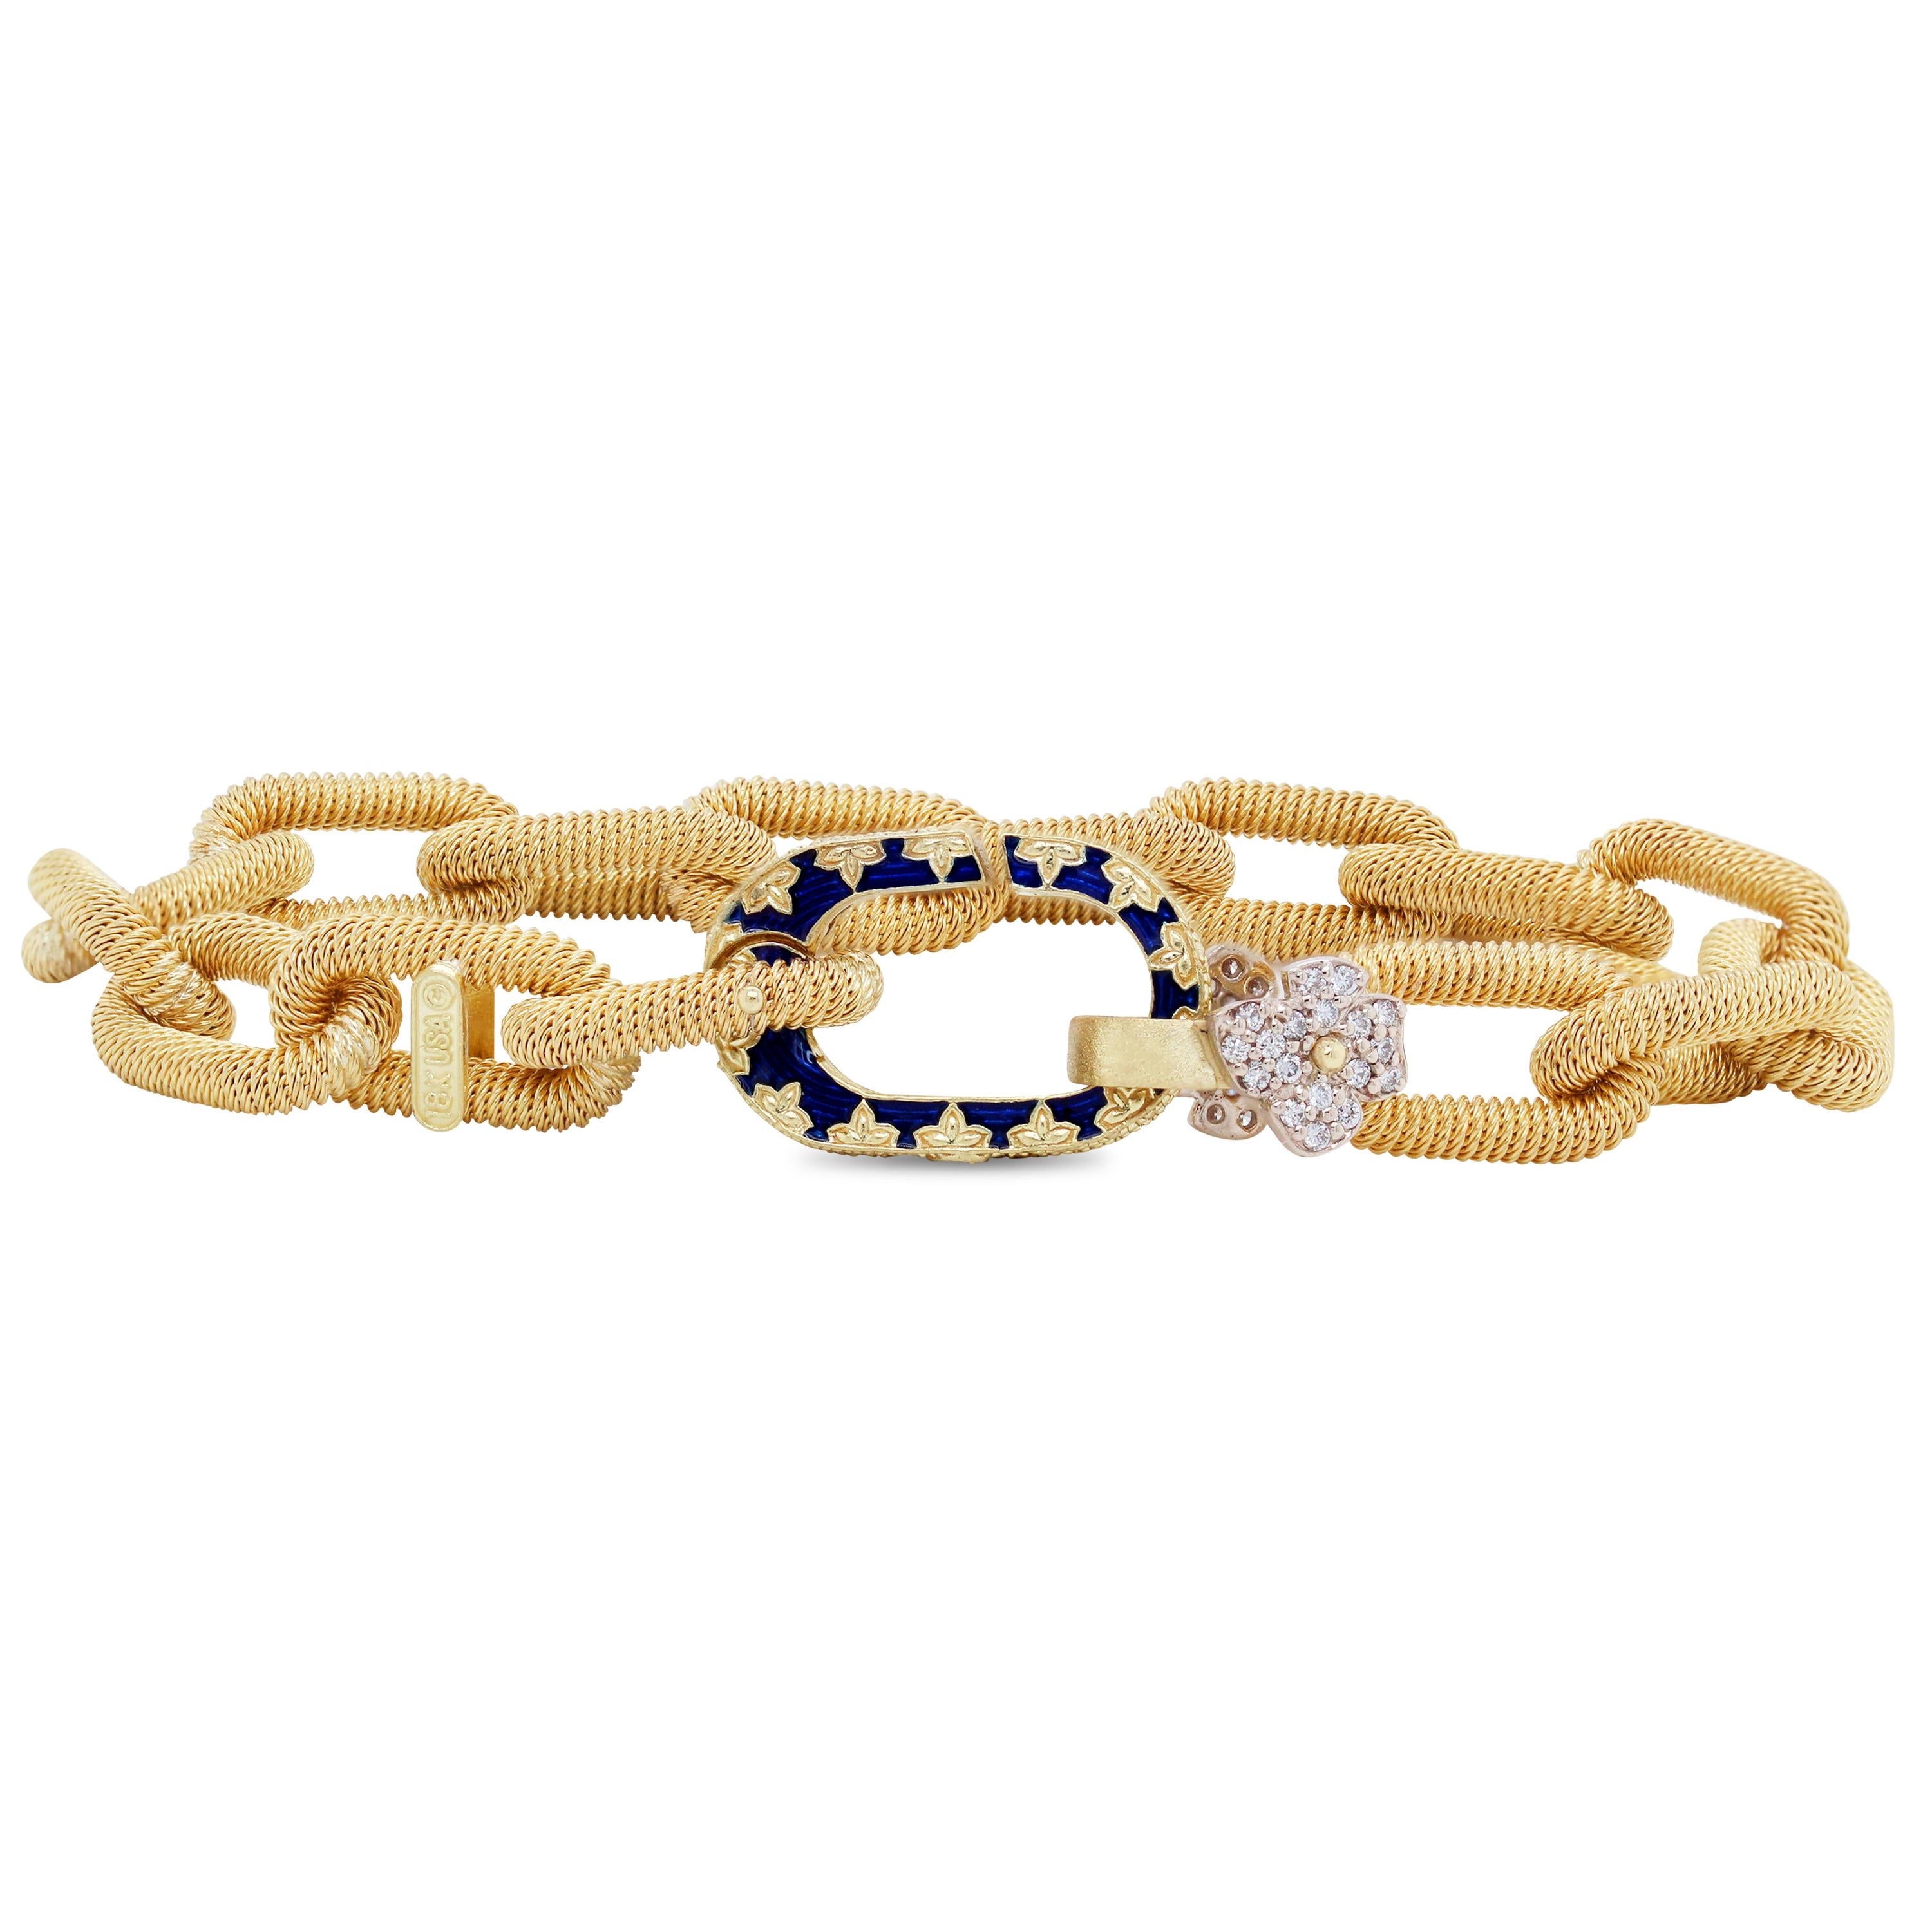 18K Yellow Gold Link Bracelet with Diamonds and a Blue Enamel Clasp by Stambolian

This gorgeous bracelet from the Spring 2020 collection by Stambolian features beautiful textured links all leading to a blue enamel clasp with a diamond flower. The